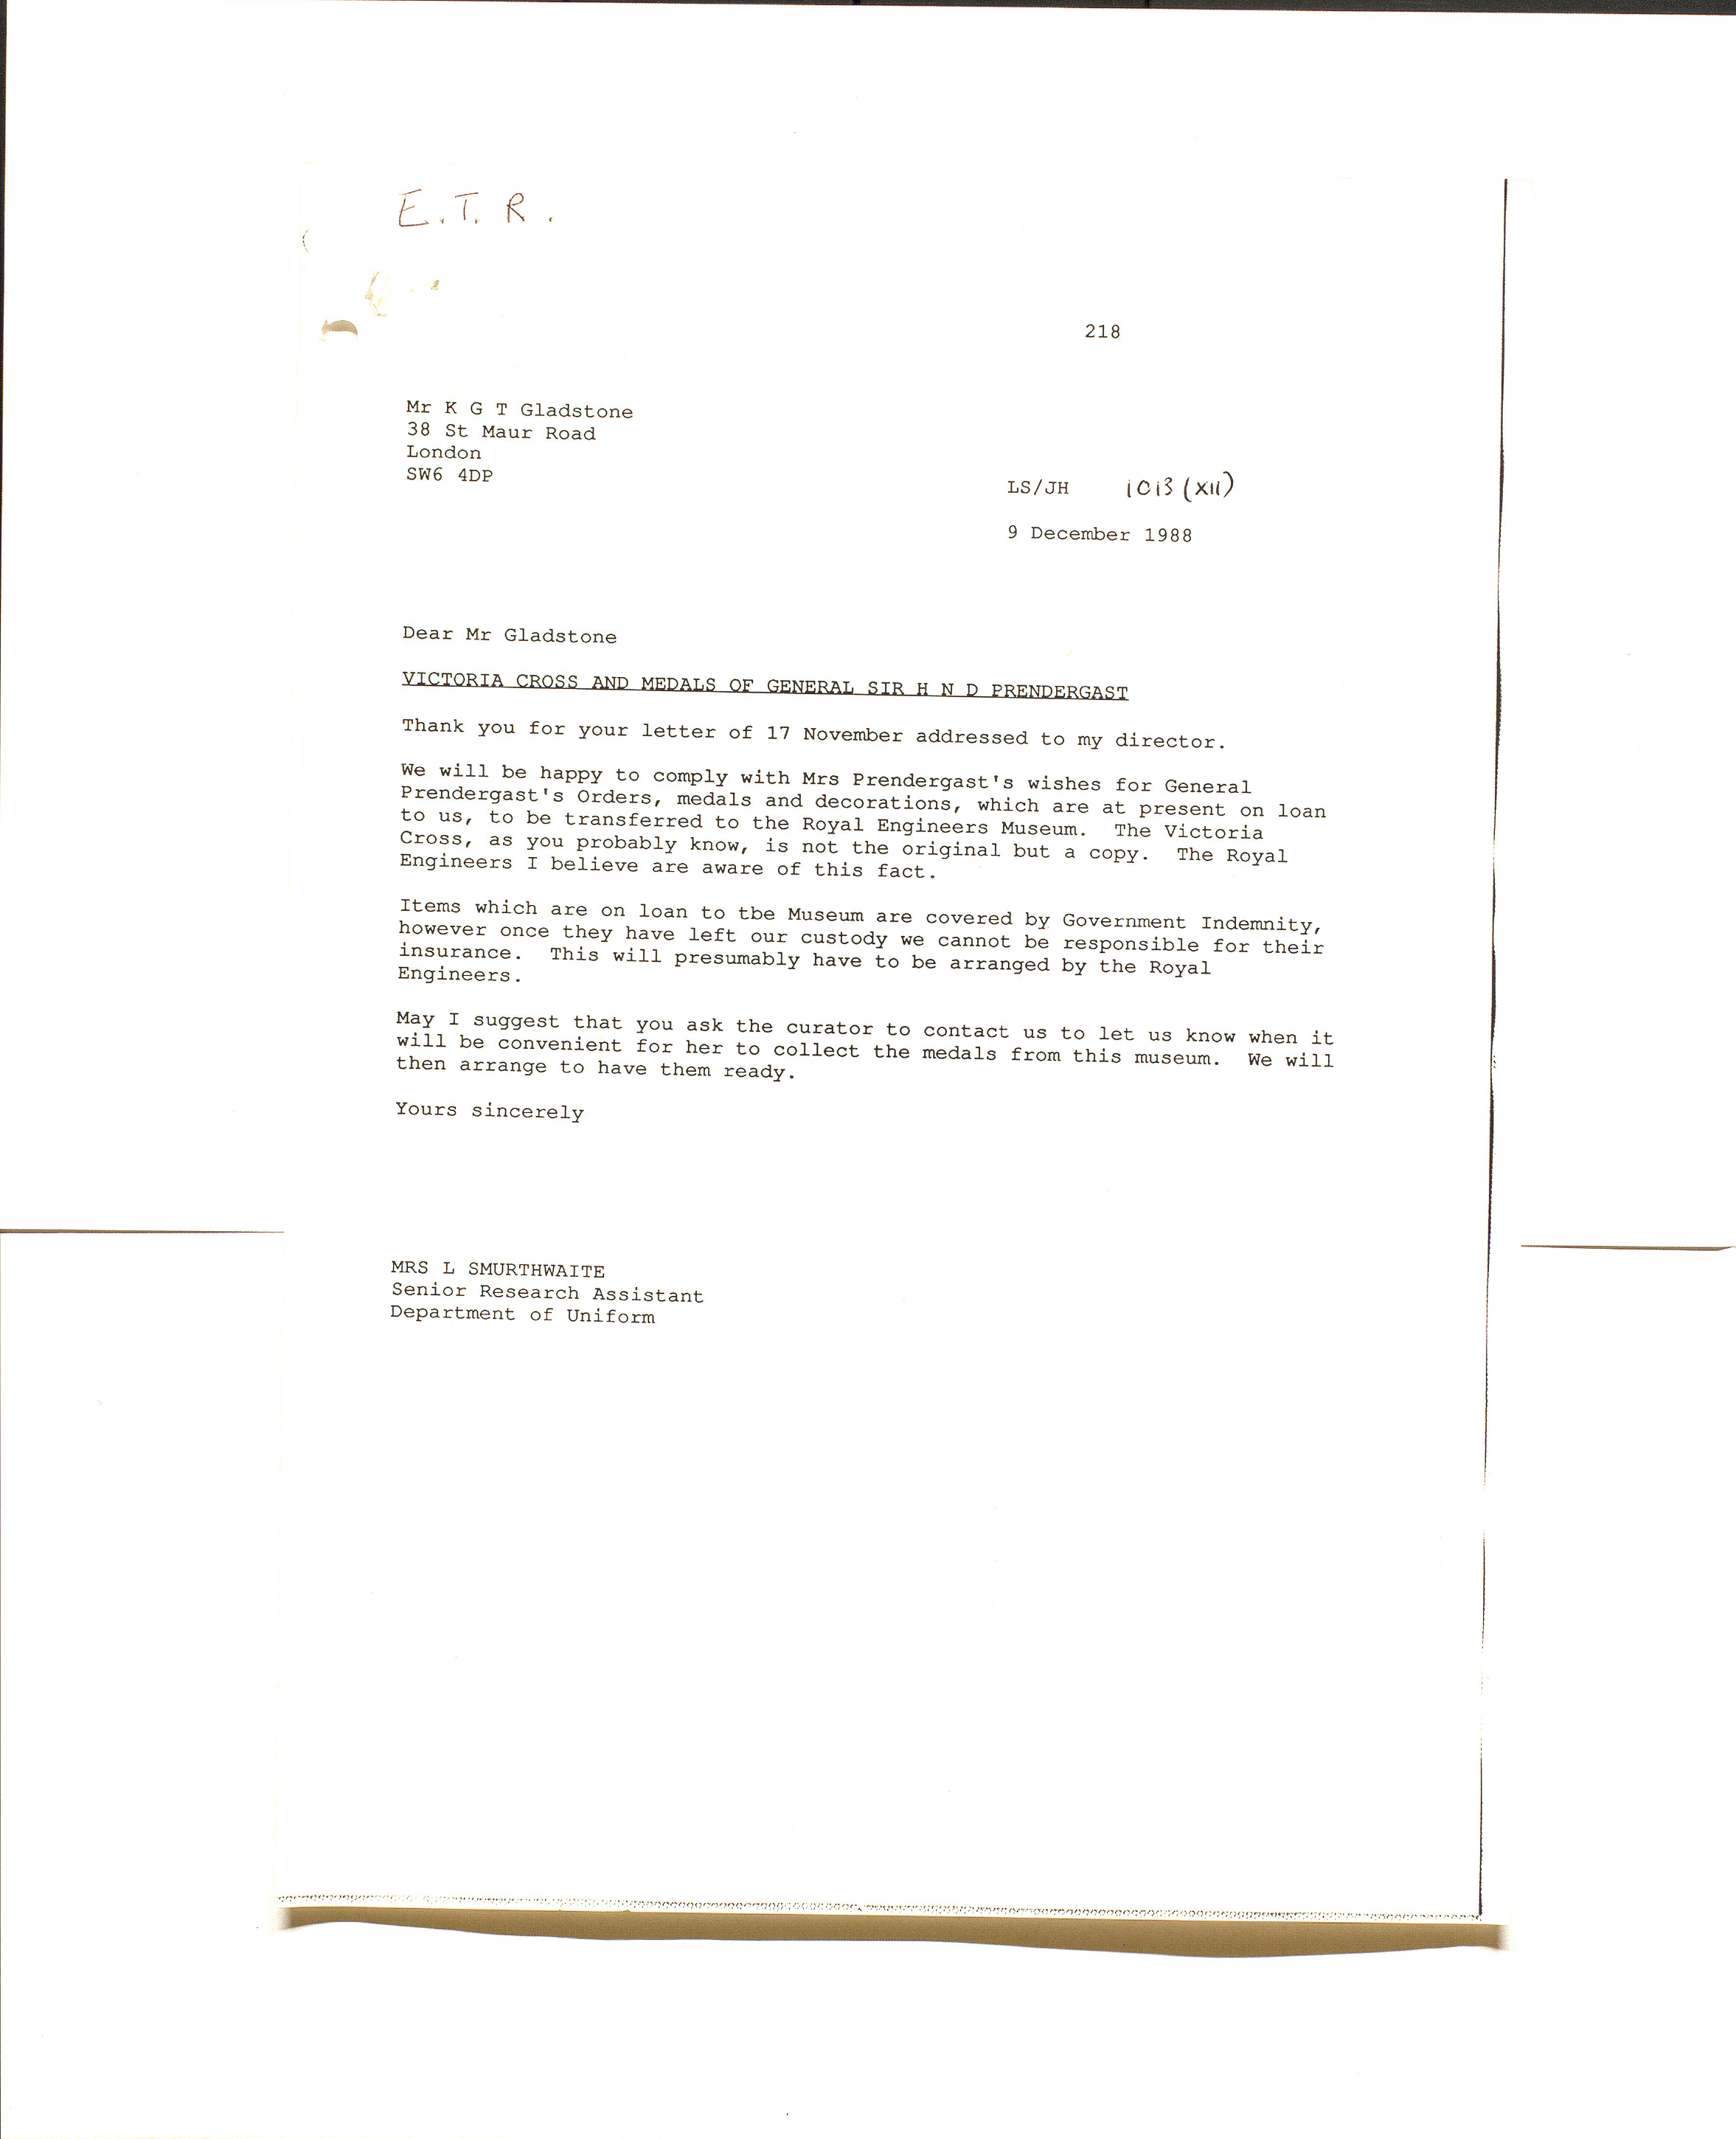  Reply from NAM confirming transfer of the VC to REM 